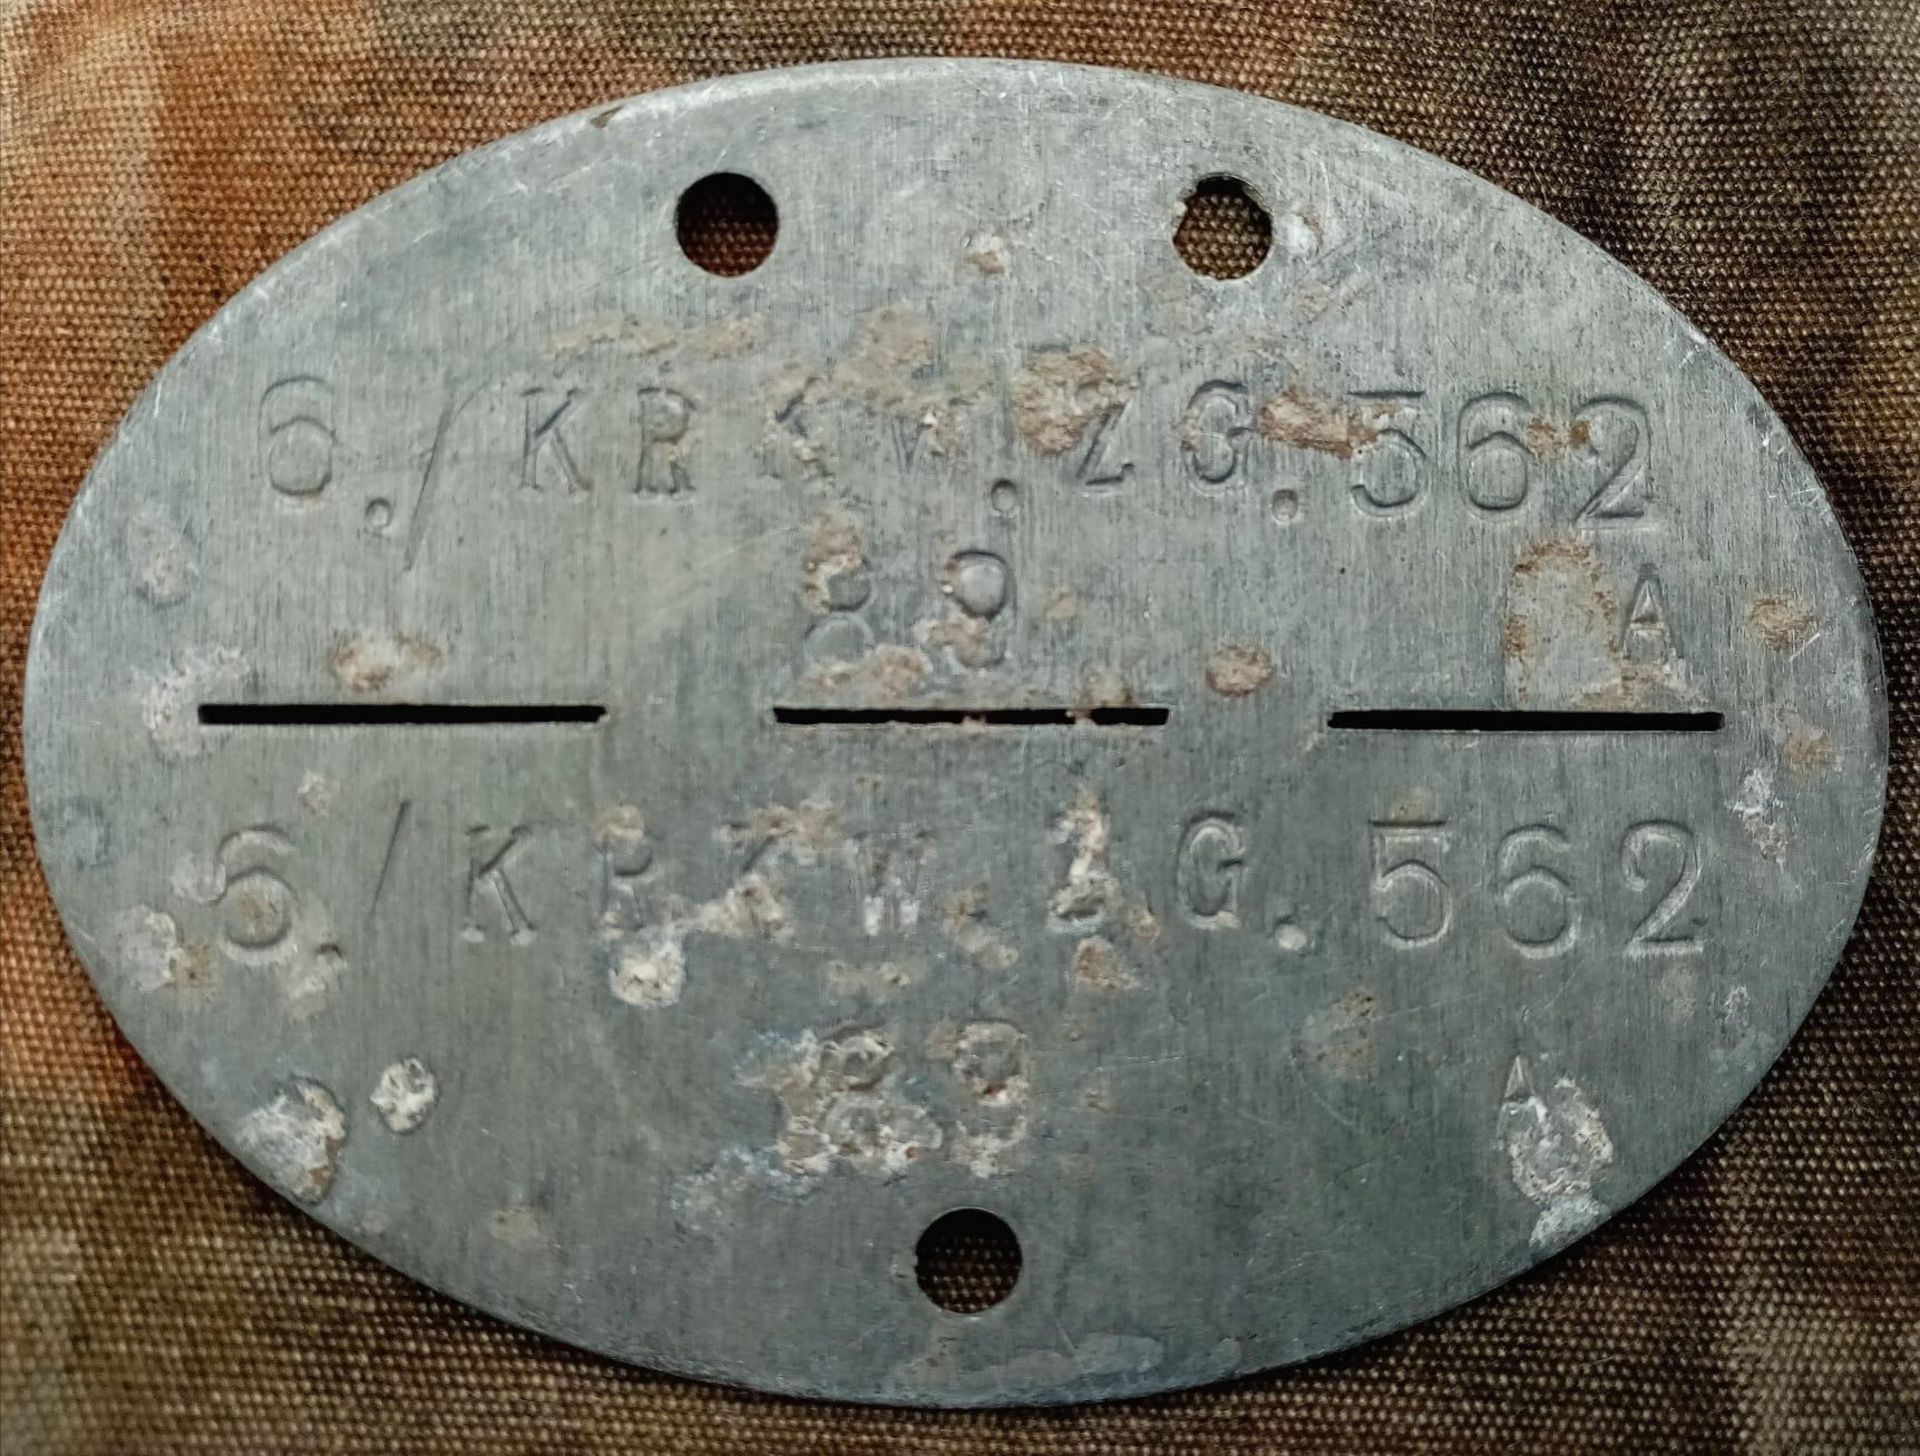 WW2 German Army Dog Tag for an Infantry Driver. The tag comes in a home-made pouch. - Image 3 of 3